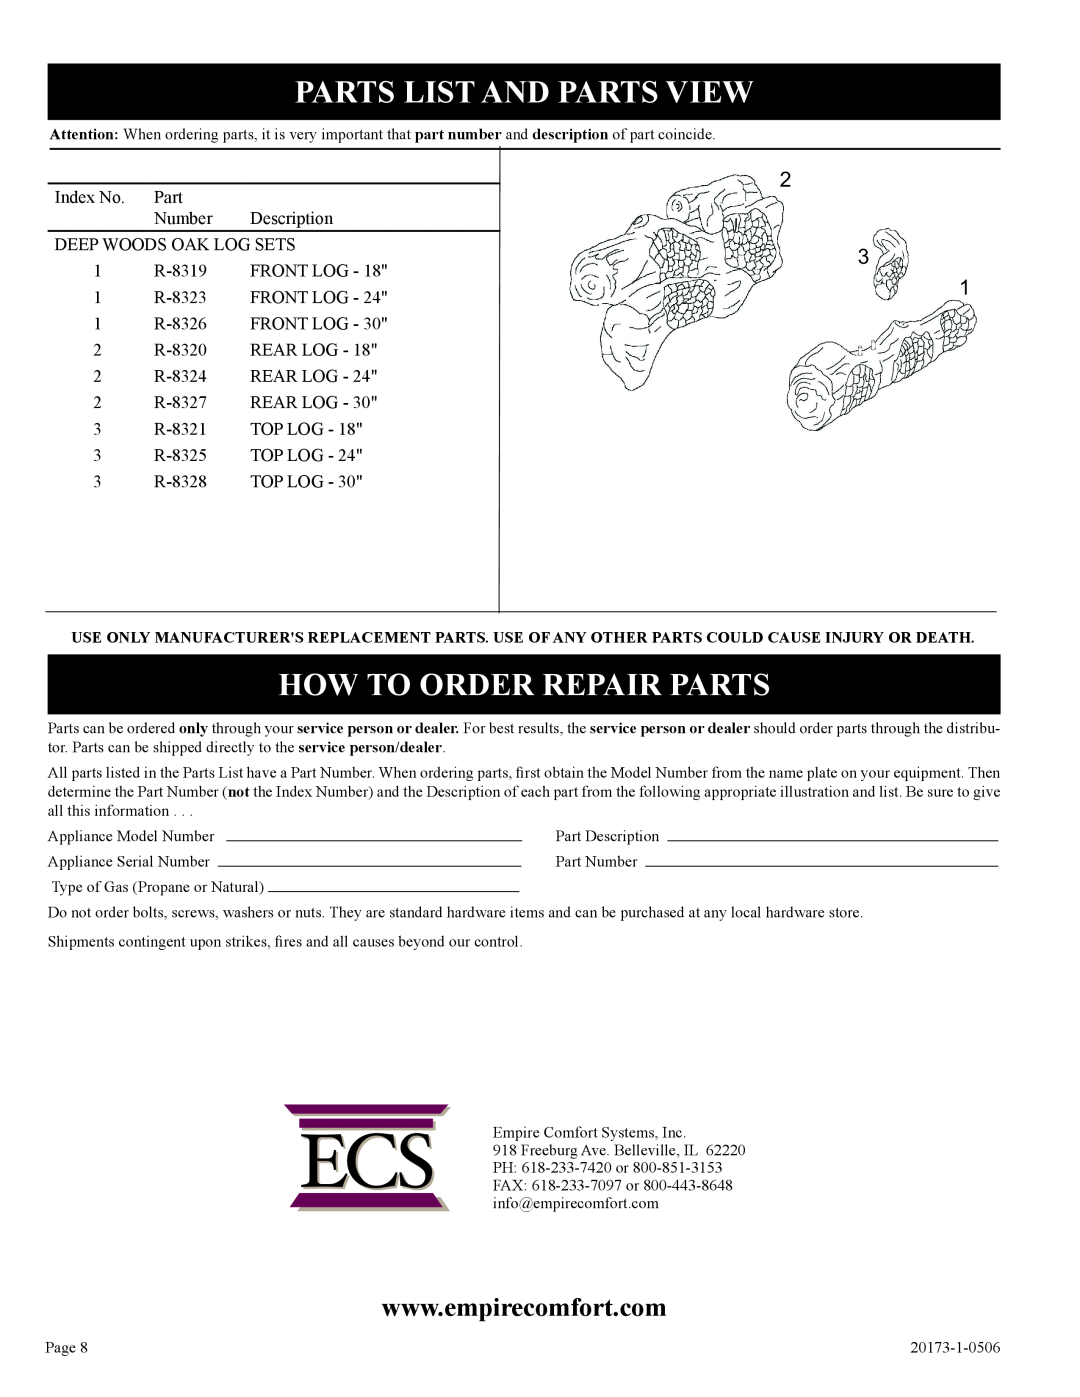 Empire Comfort Systems LS-18H-1, LS-24H-1, LS-30H-1 Parts List And Parts View, How To Order Repair Parts 